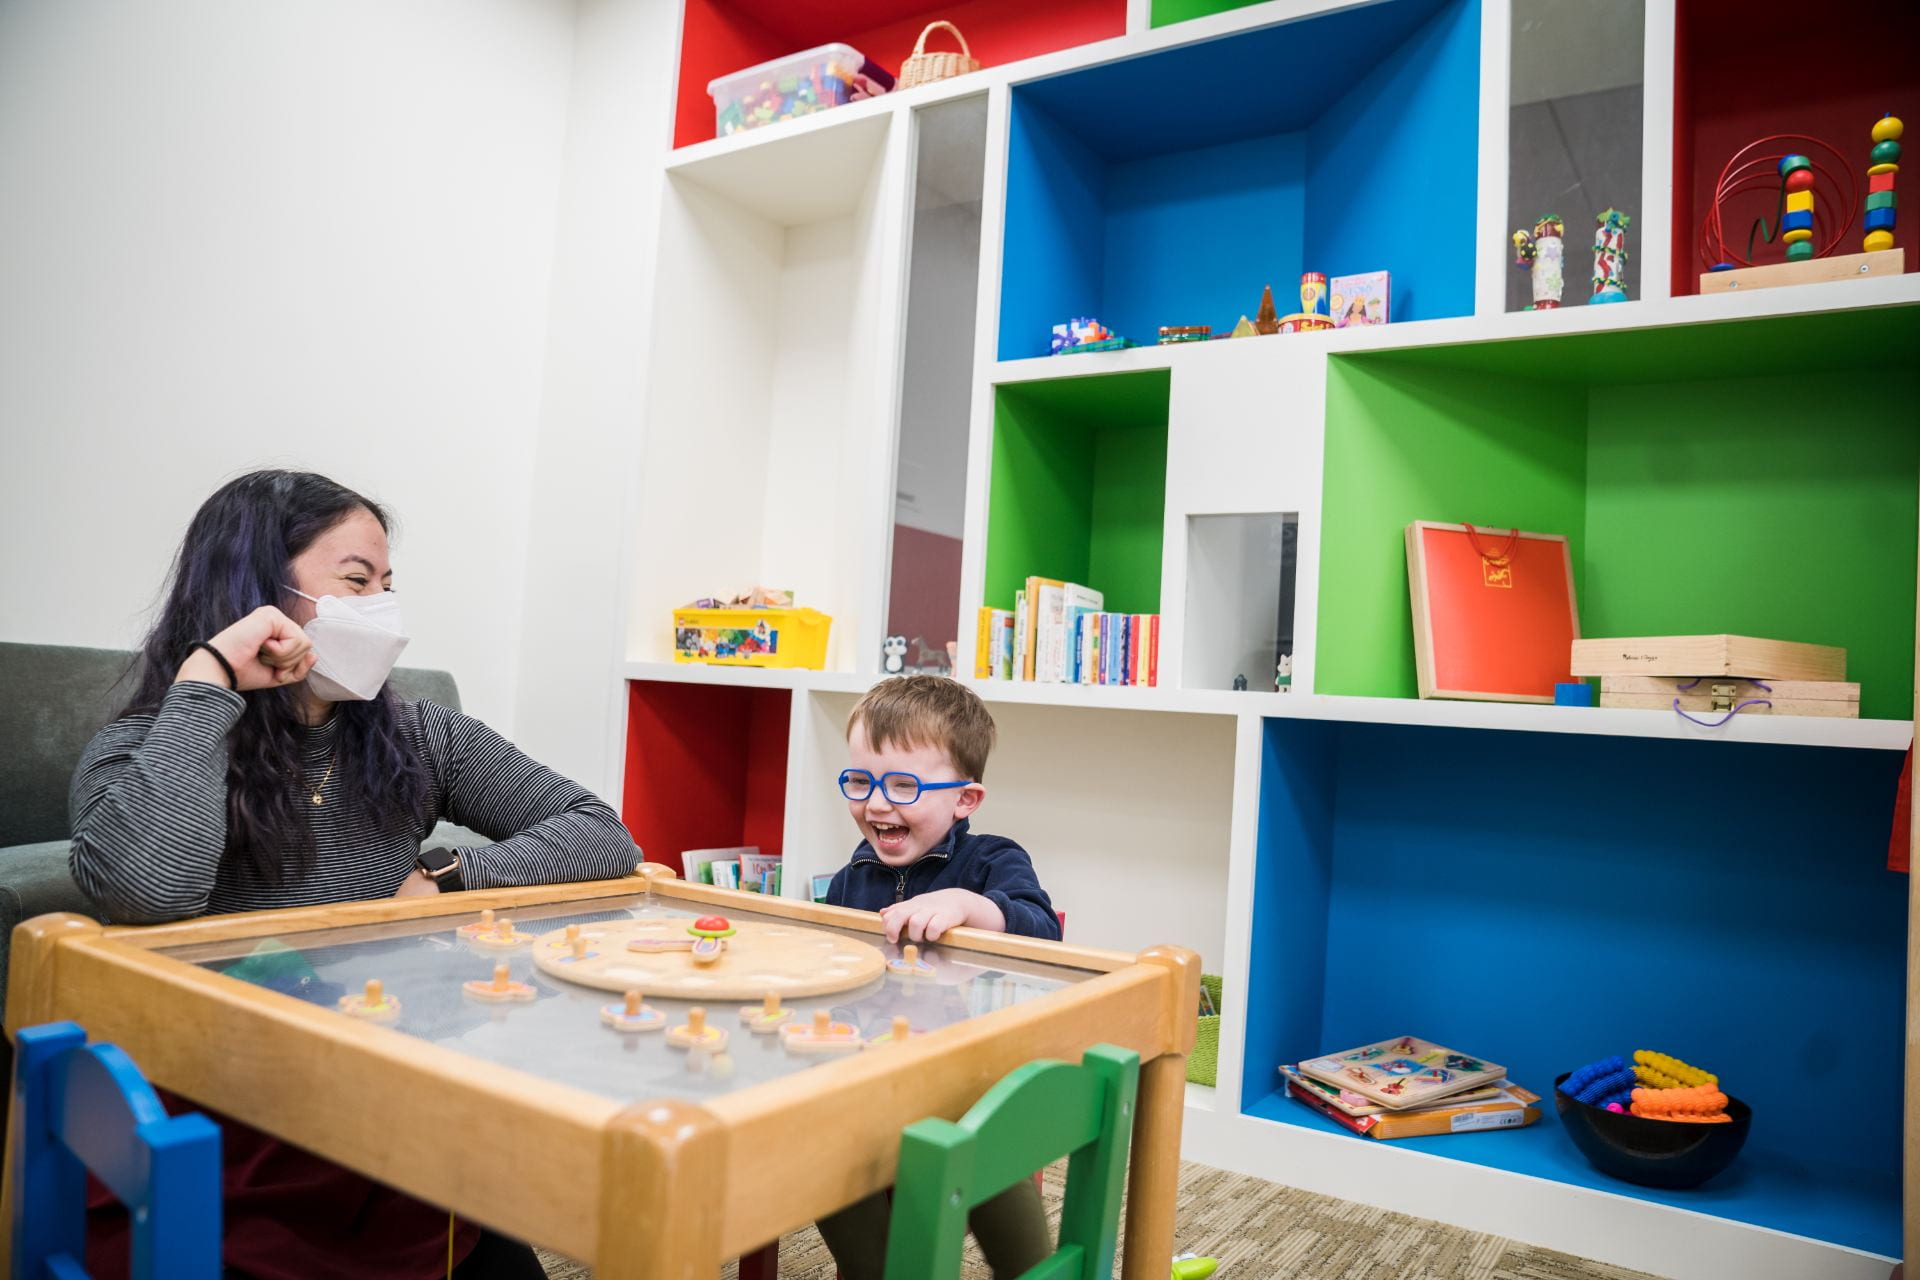 Small child with blue glasses is laughing and playing with a puzzle. An experimenter is playing with them. They are in a colorful lab waiting room.